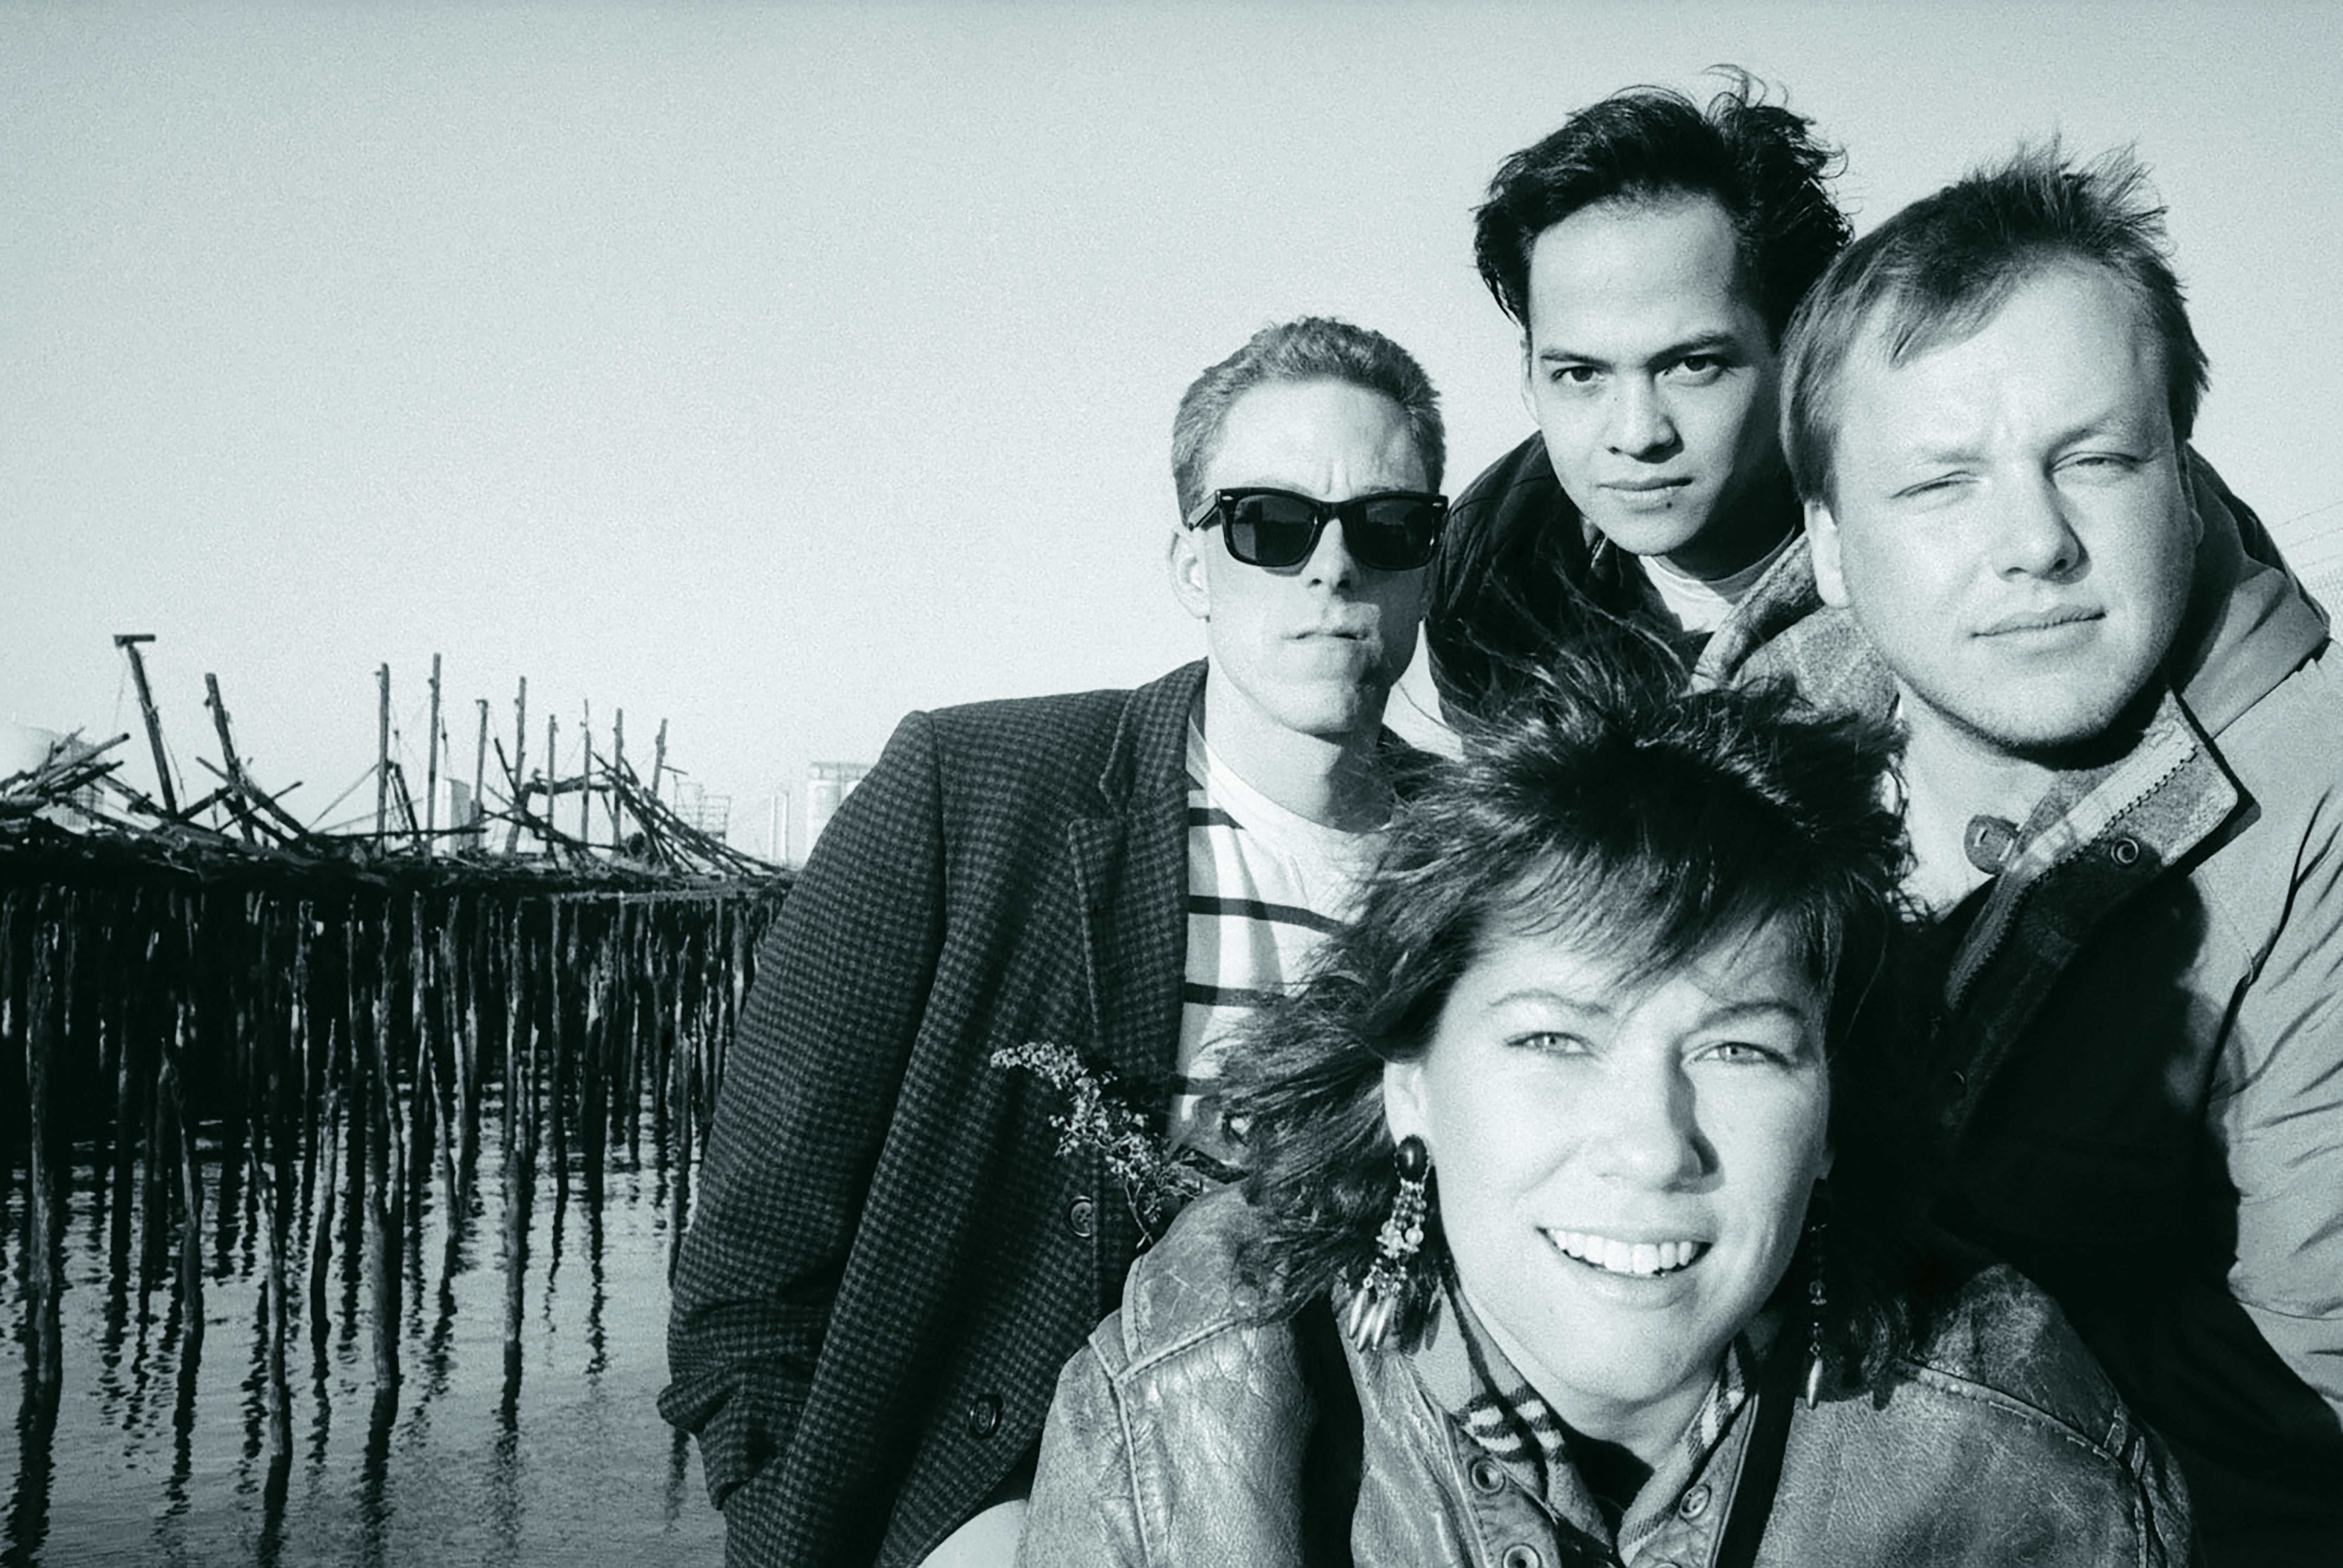 American indie band The Pixies, late 1980s. From left to right, drummer Dave Lovering, bassist Kim Deal, front, guitarist Joey Santiago and singer Black Francis. (Photo by Steve Pyke/Getty Images)